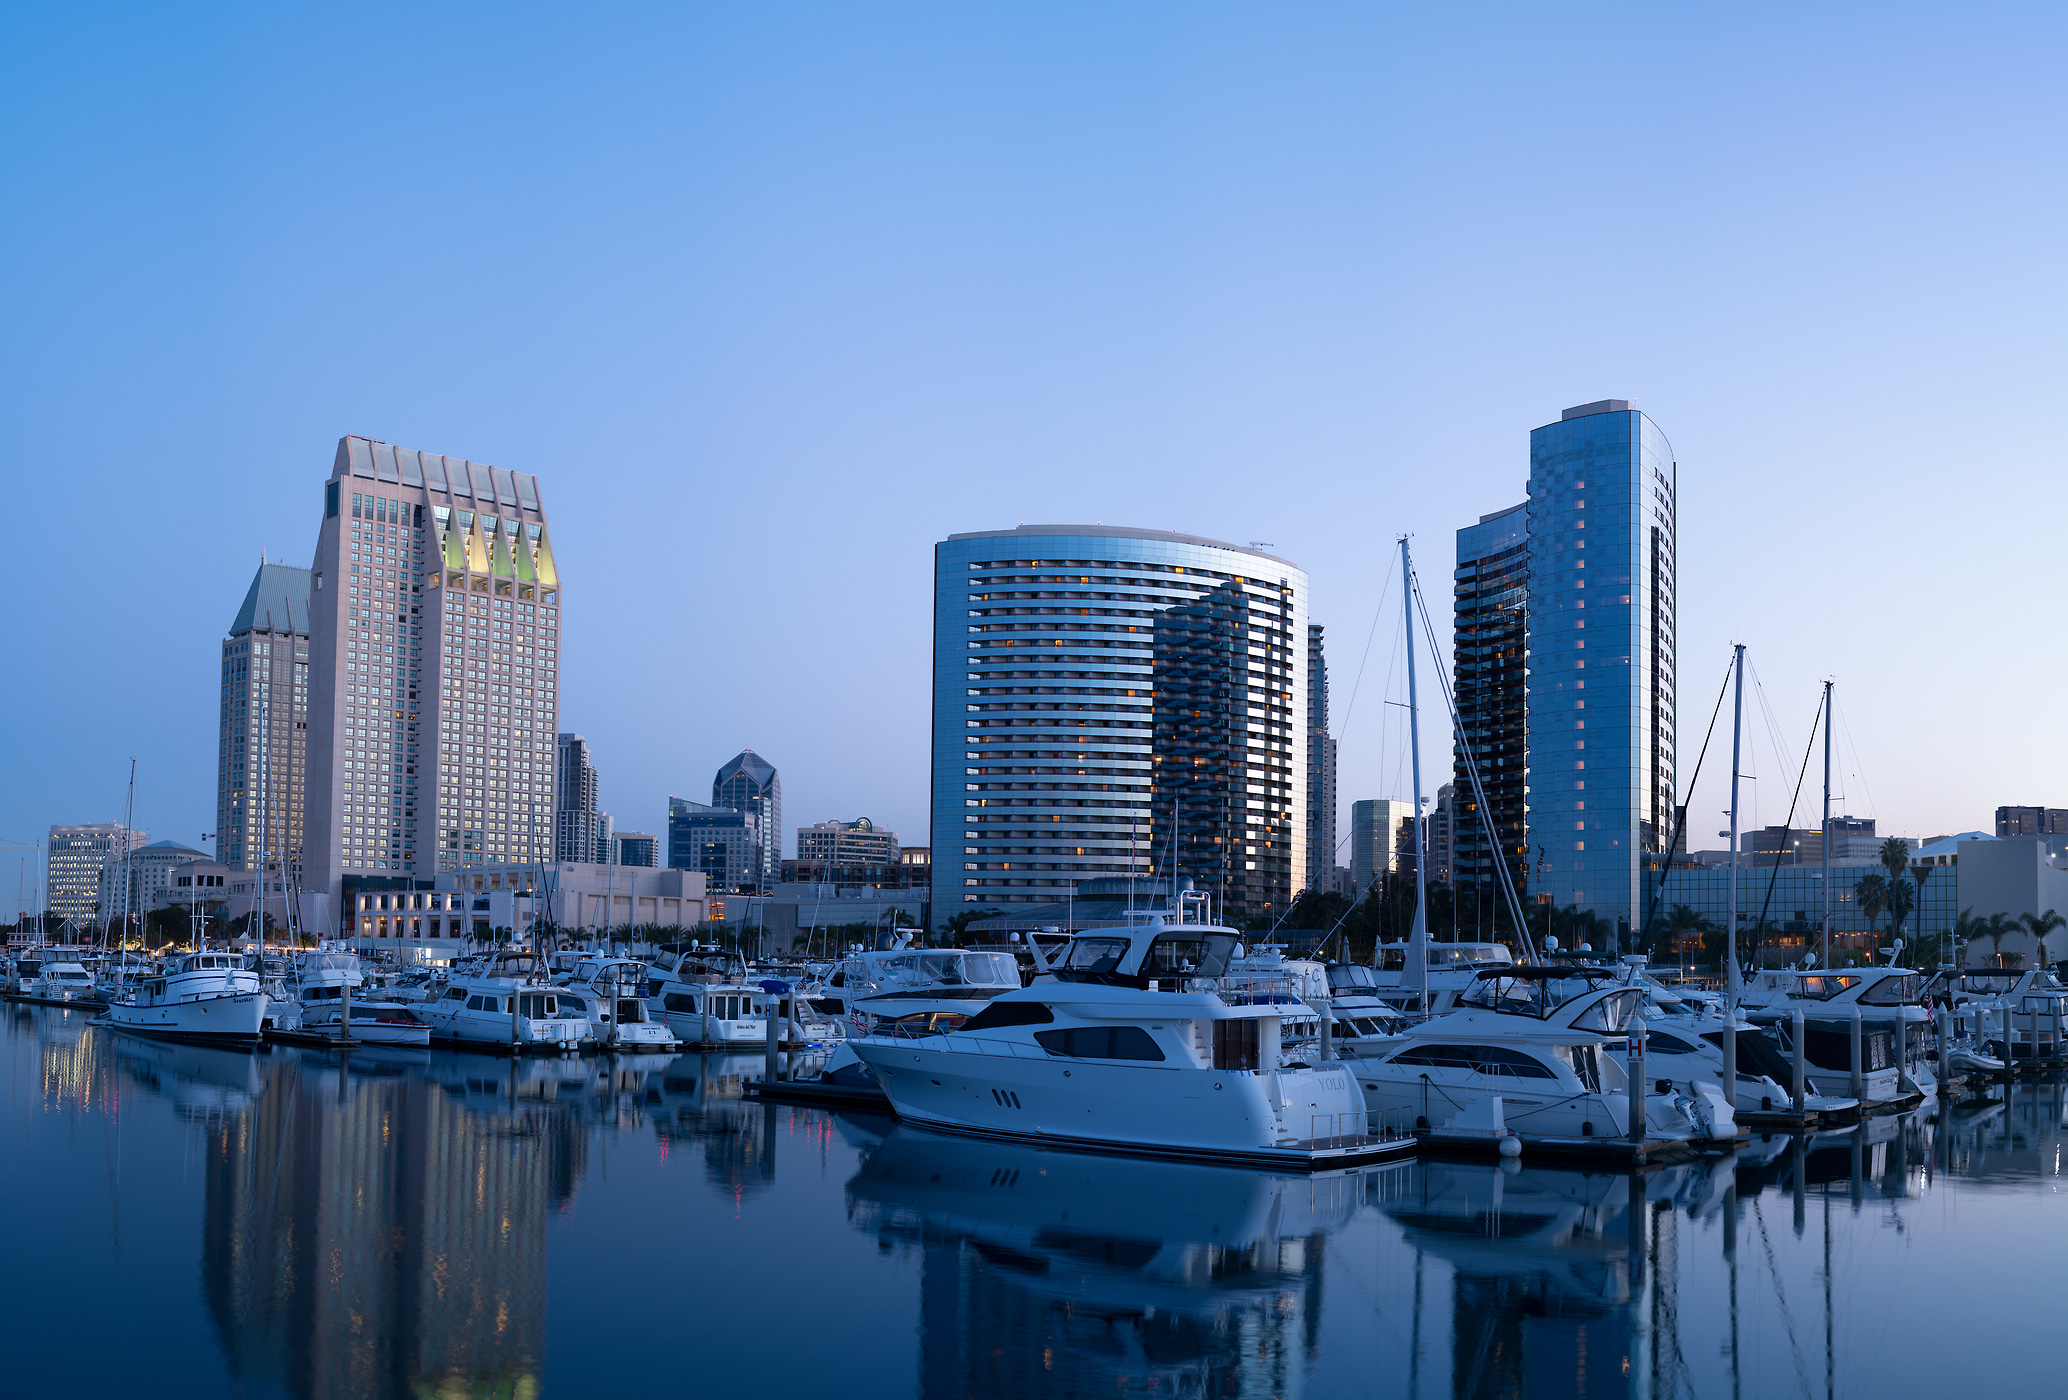 373 megapixels! A very high resolution, large-format VAST photo print of Embarcadero Marina in San Diego harbor; photograph created by Greg Probst.